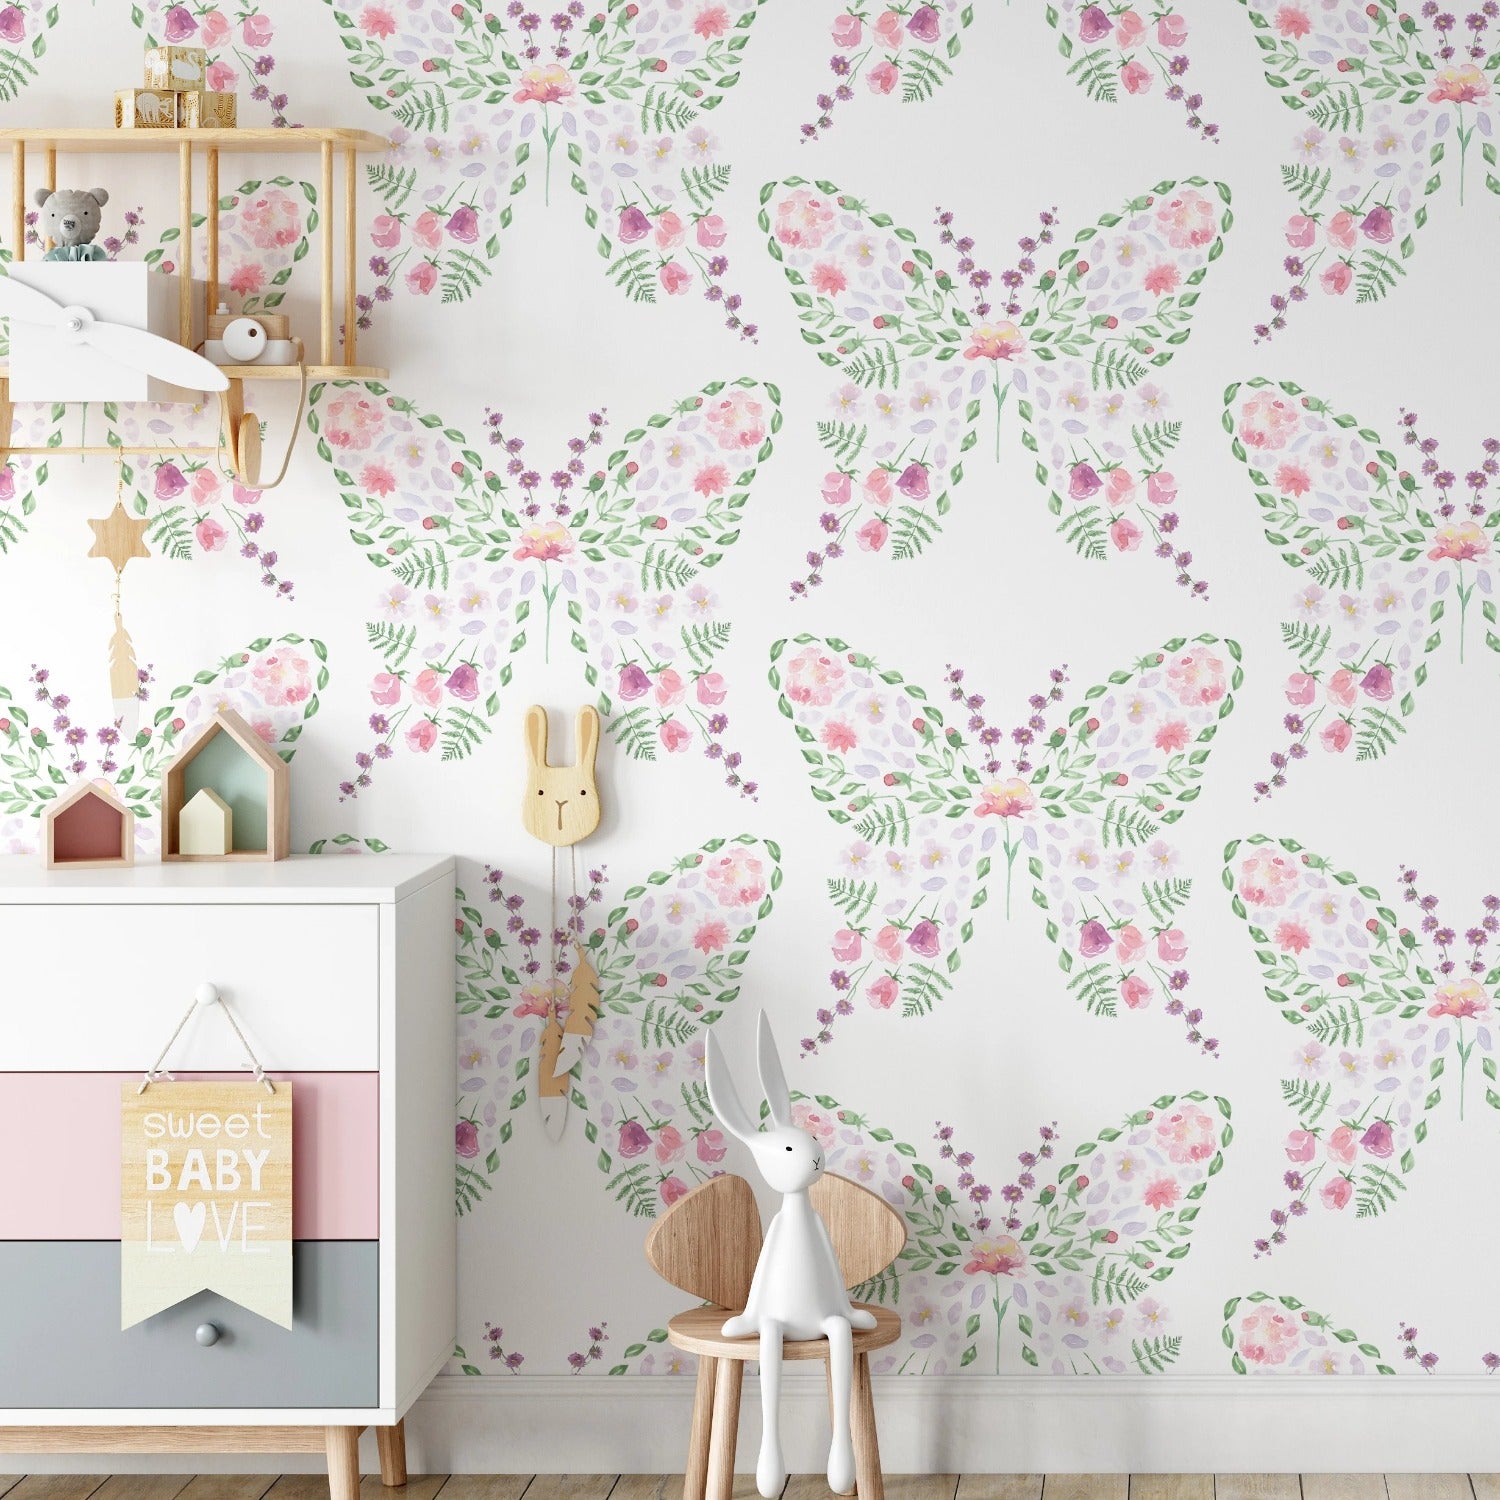 DIY Nursery Makeover: Transforming Your Baby's Room with Peel and Stick Wallpaper